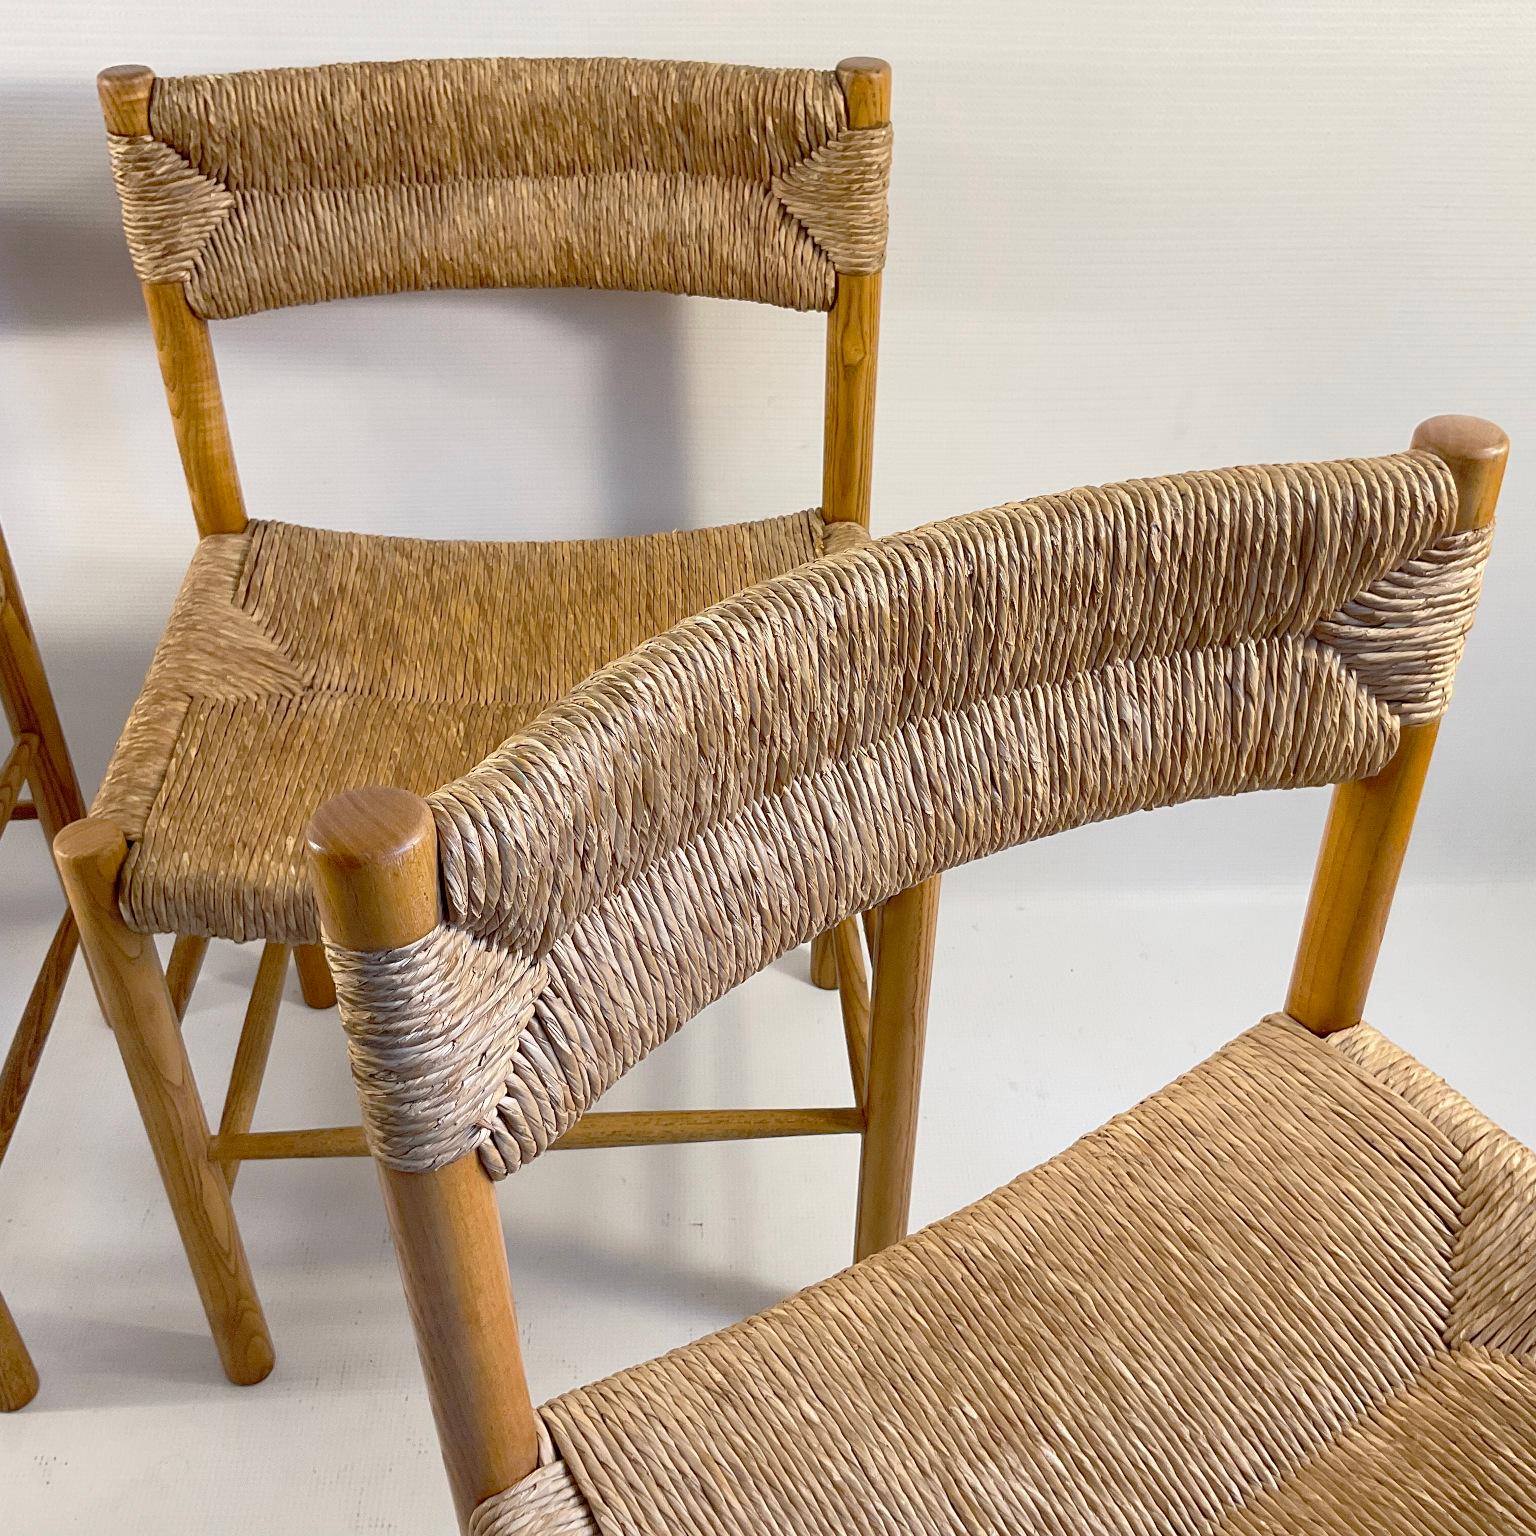 Straw Set of Four Dordogne Chairs by Robert Sentou for Charlotte Perriand France 1960s For Sale